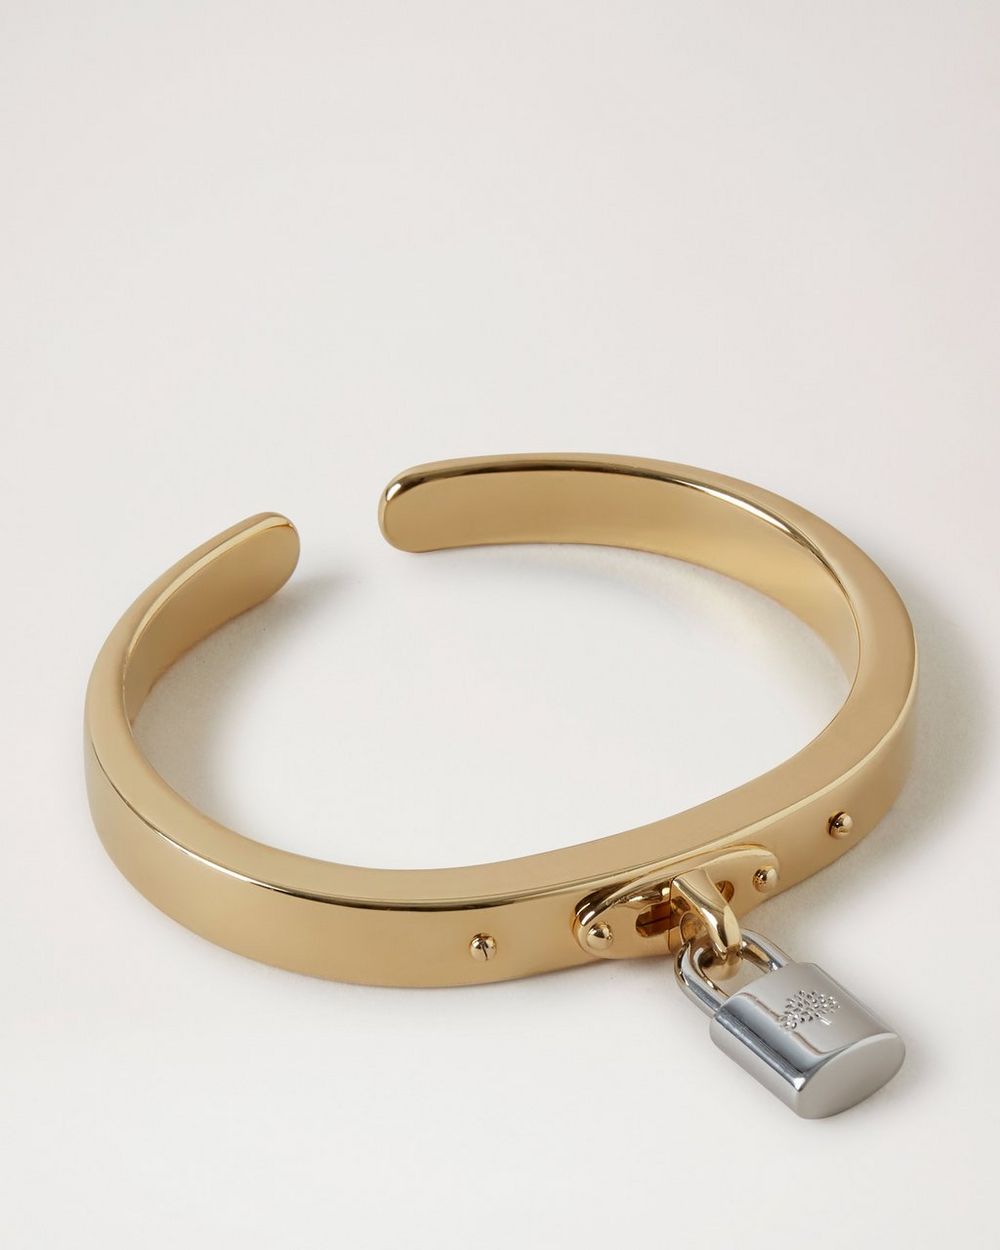 TRR Top 5: Cartier Bracelets & More Jewelry With The Best Resale Value